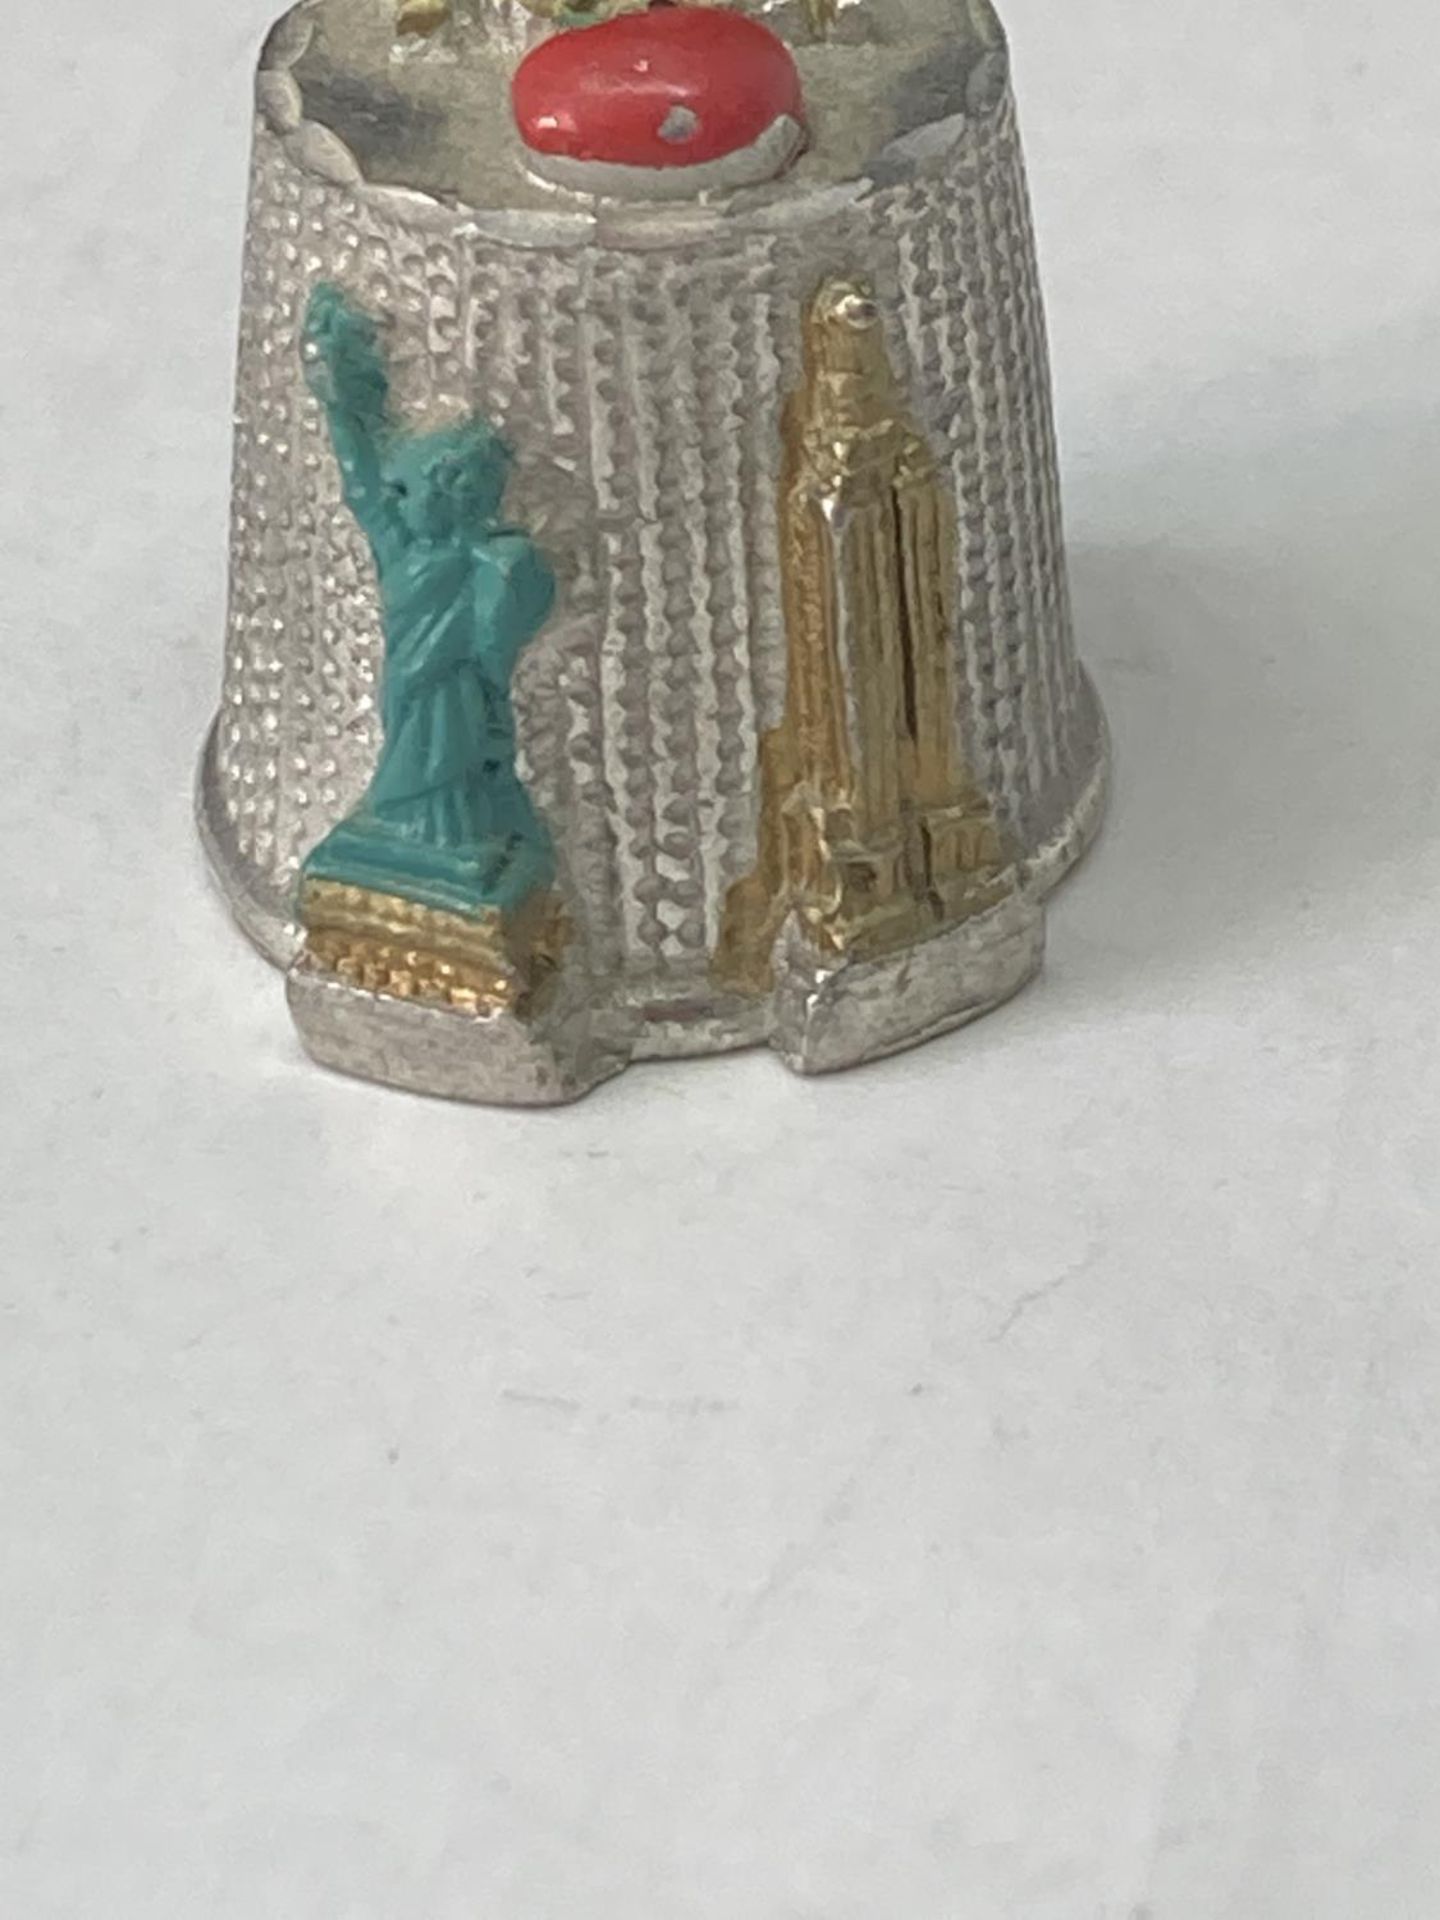 A VINTAGE PEWTER THIMBLE DEPICTING NEW YORK - Image 6 of 8